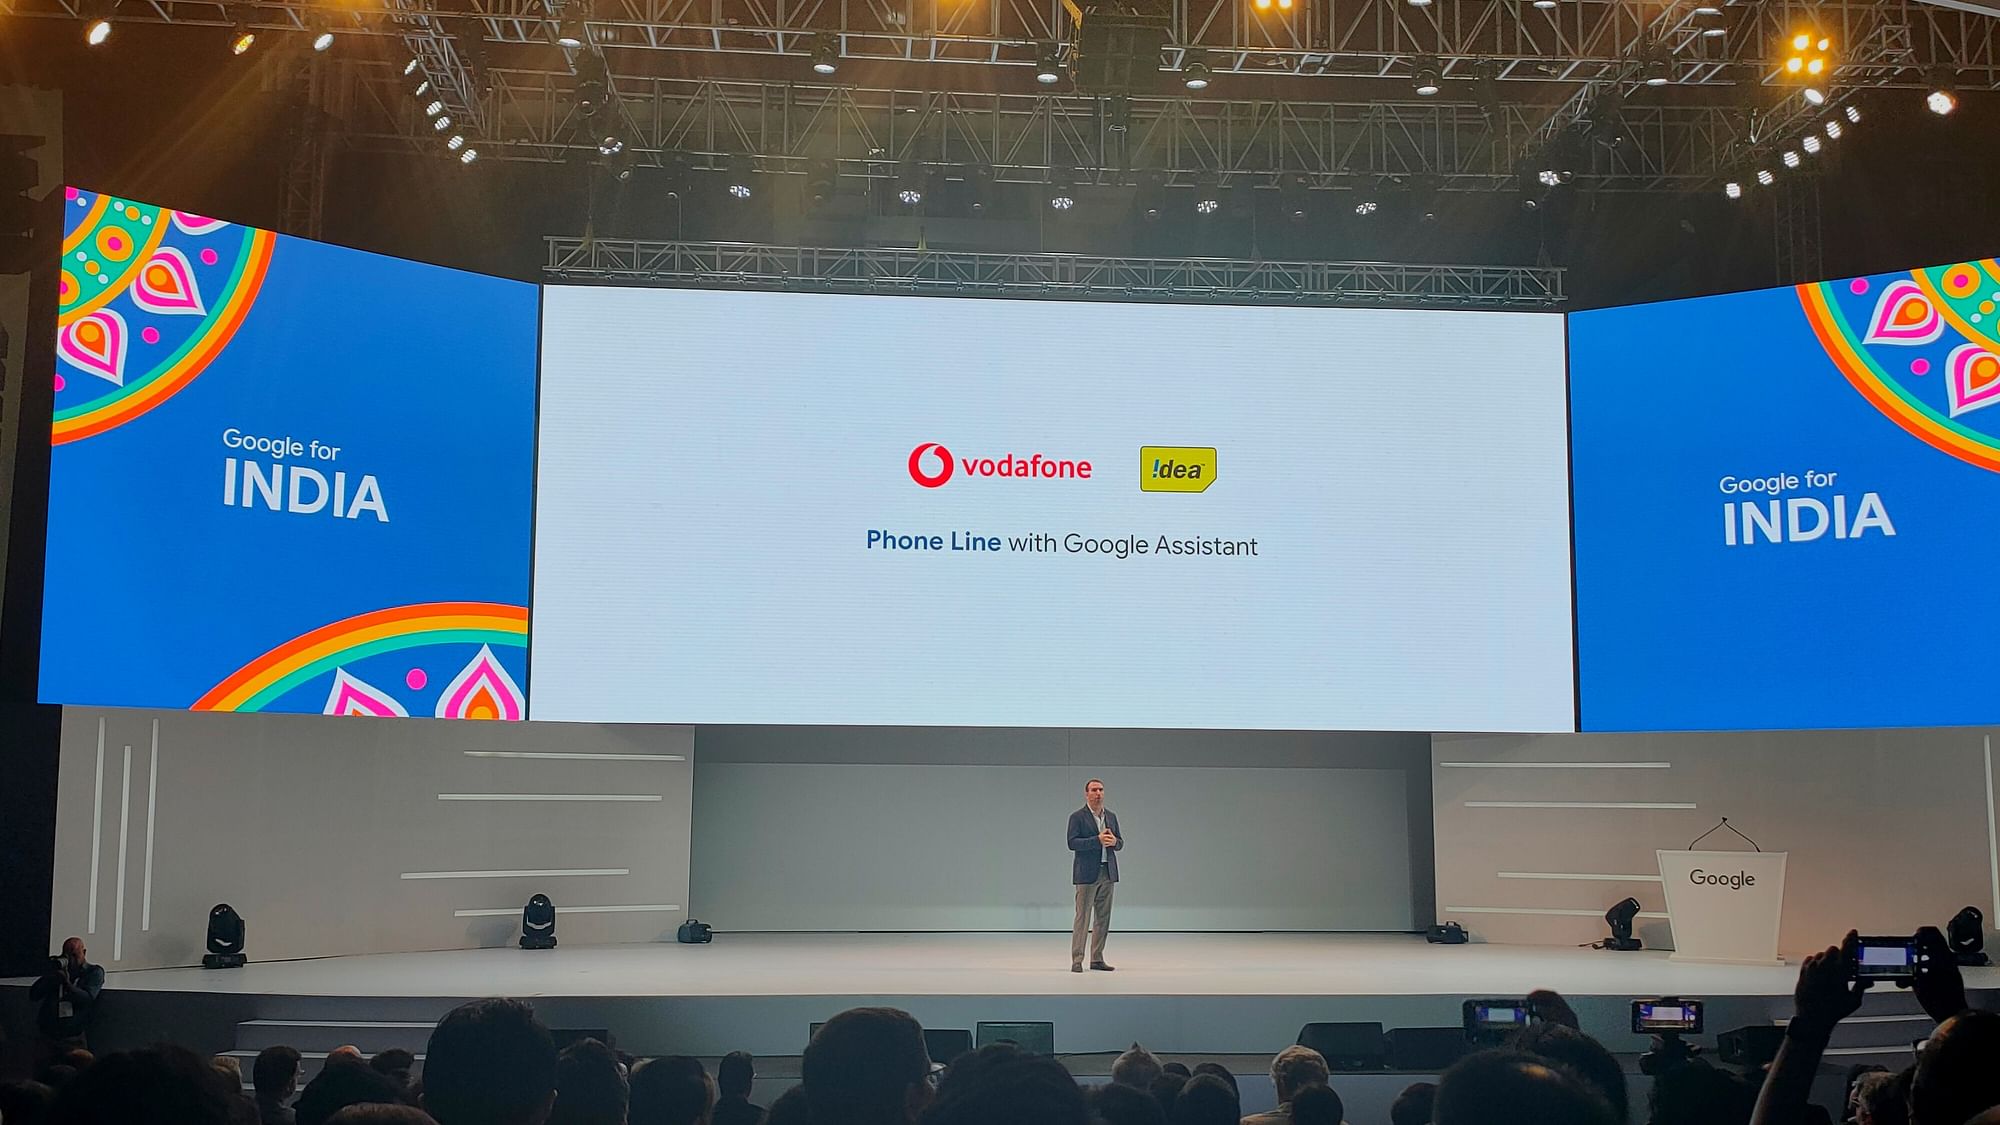 Google Assistant runs through phone lines service on Vodafone Idea available to people on 2G network.